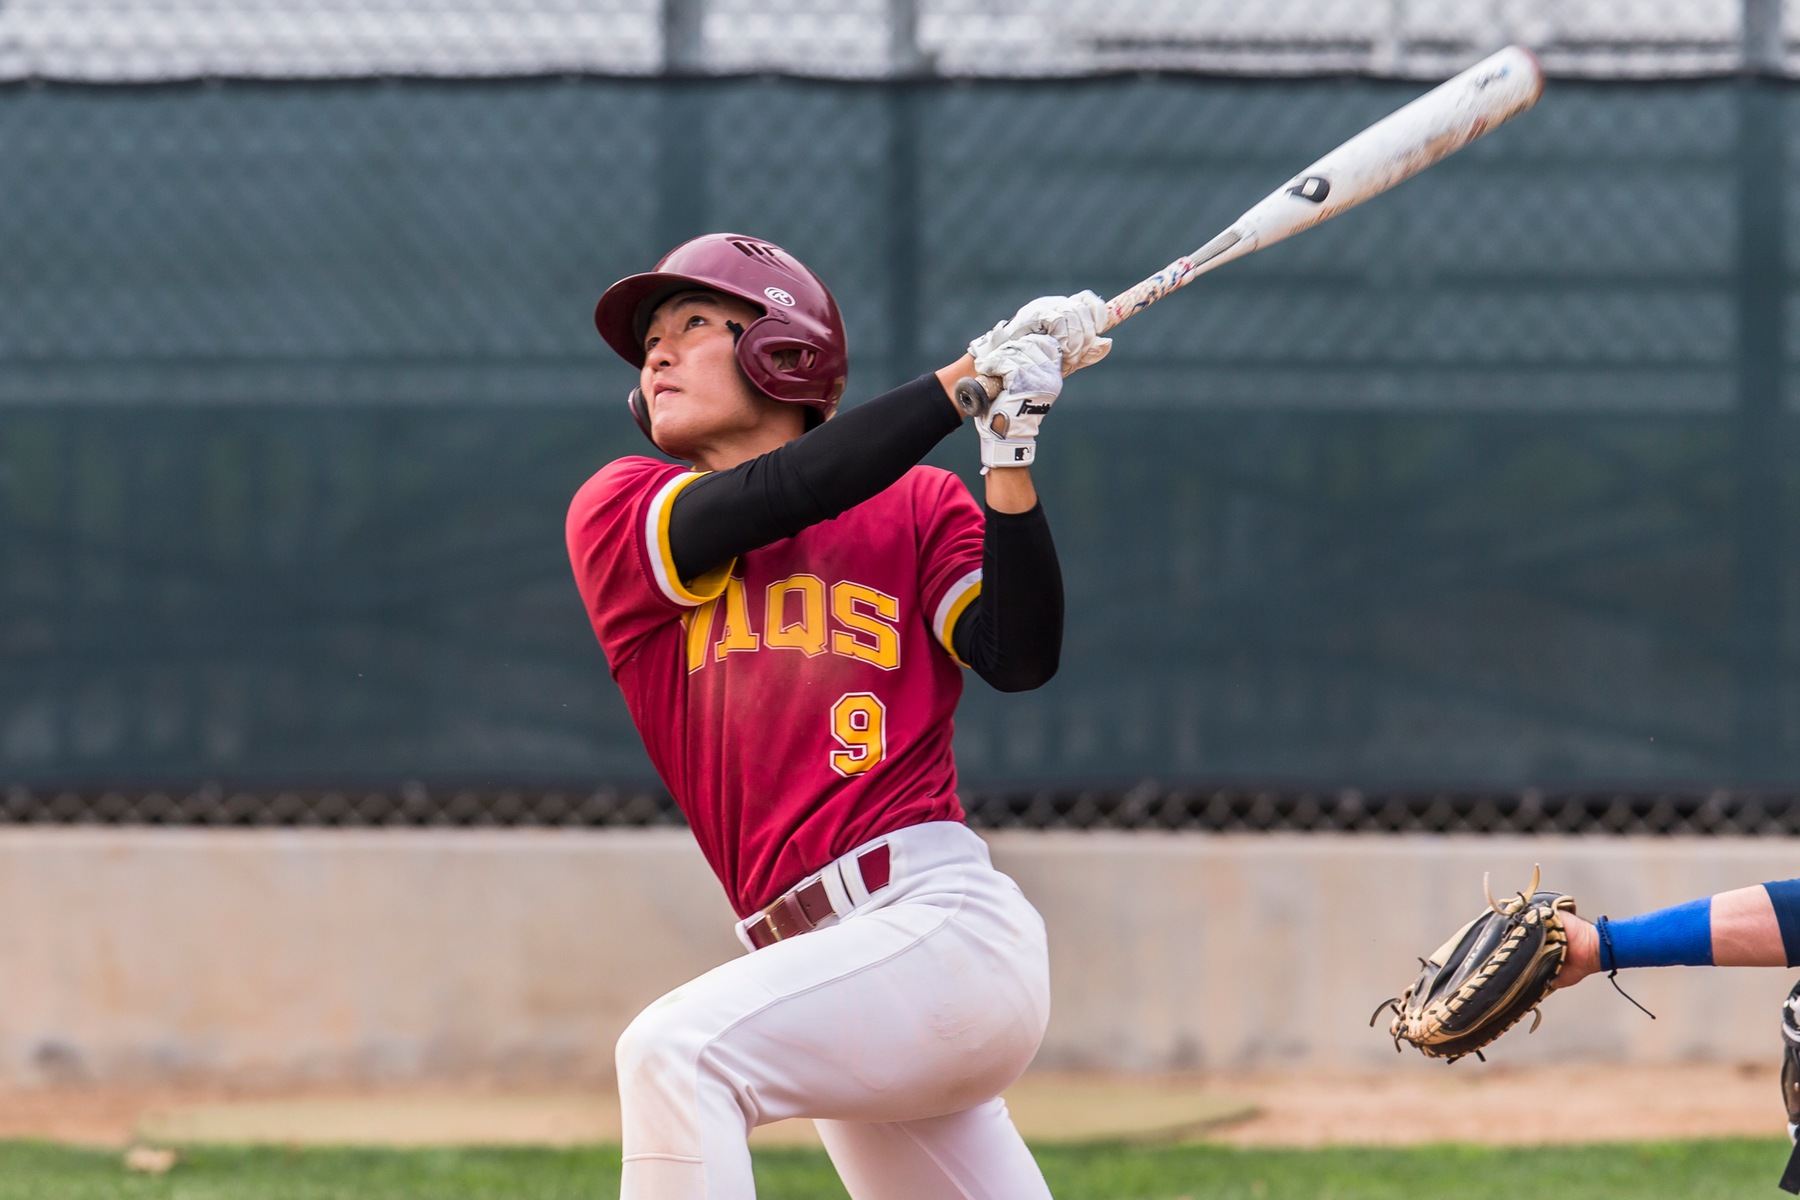 GCC winning streak grows to eight straight after blowout wins over Antelope Valley, 19-5 and 12-0; Lucas Sakay hits for the cycle